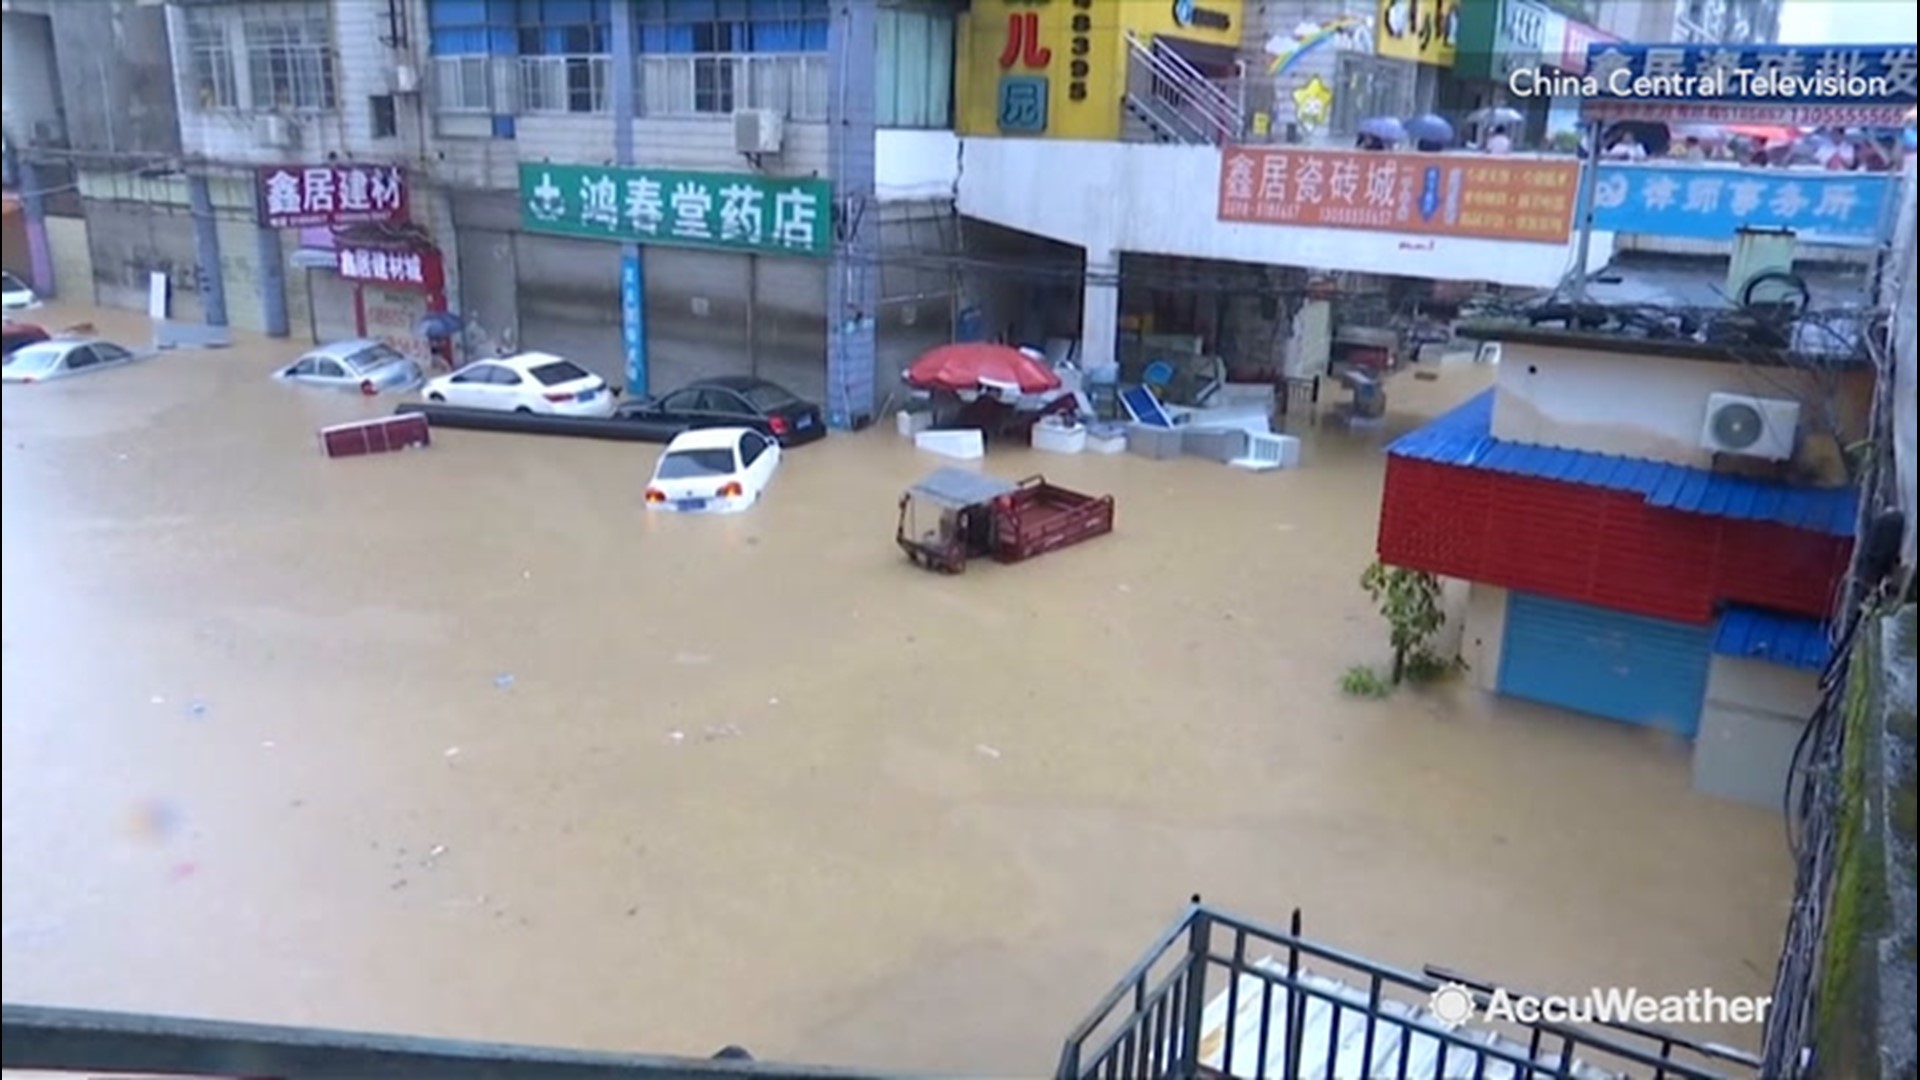 According to reports over two dozen people have died as a result of heavy rain and flooding that struck southern China over the past week.